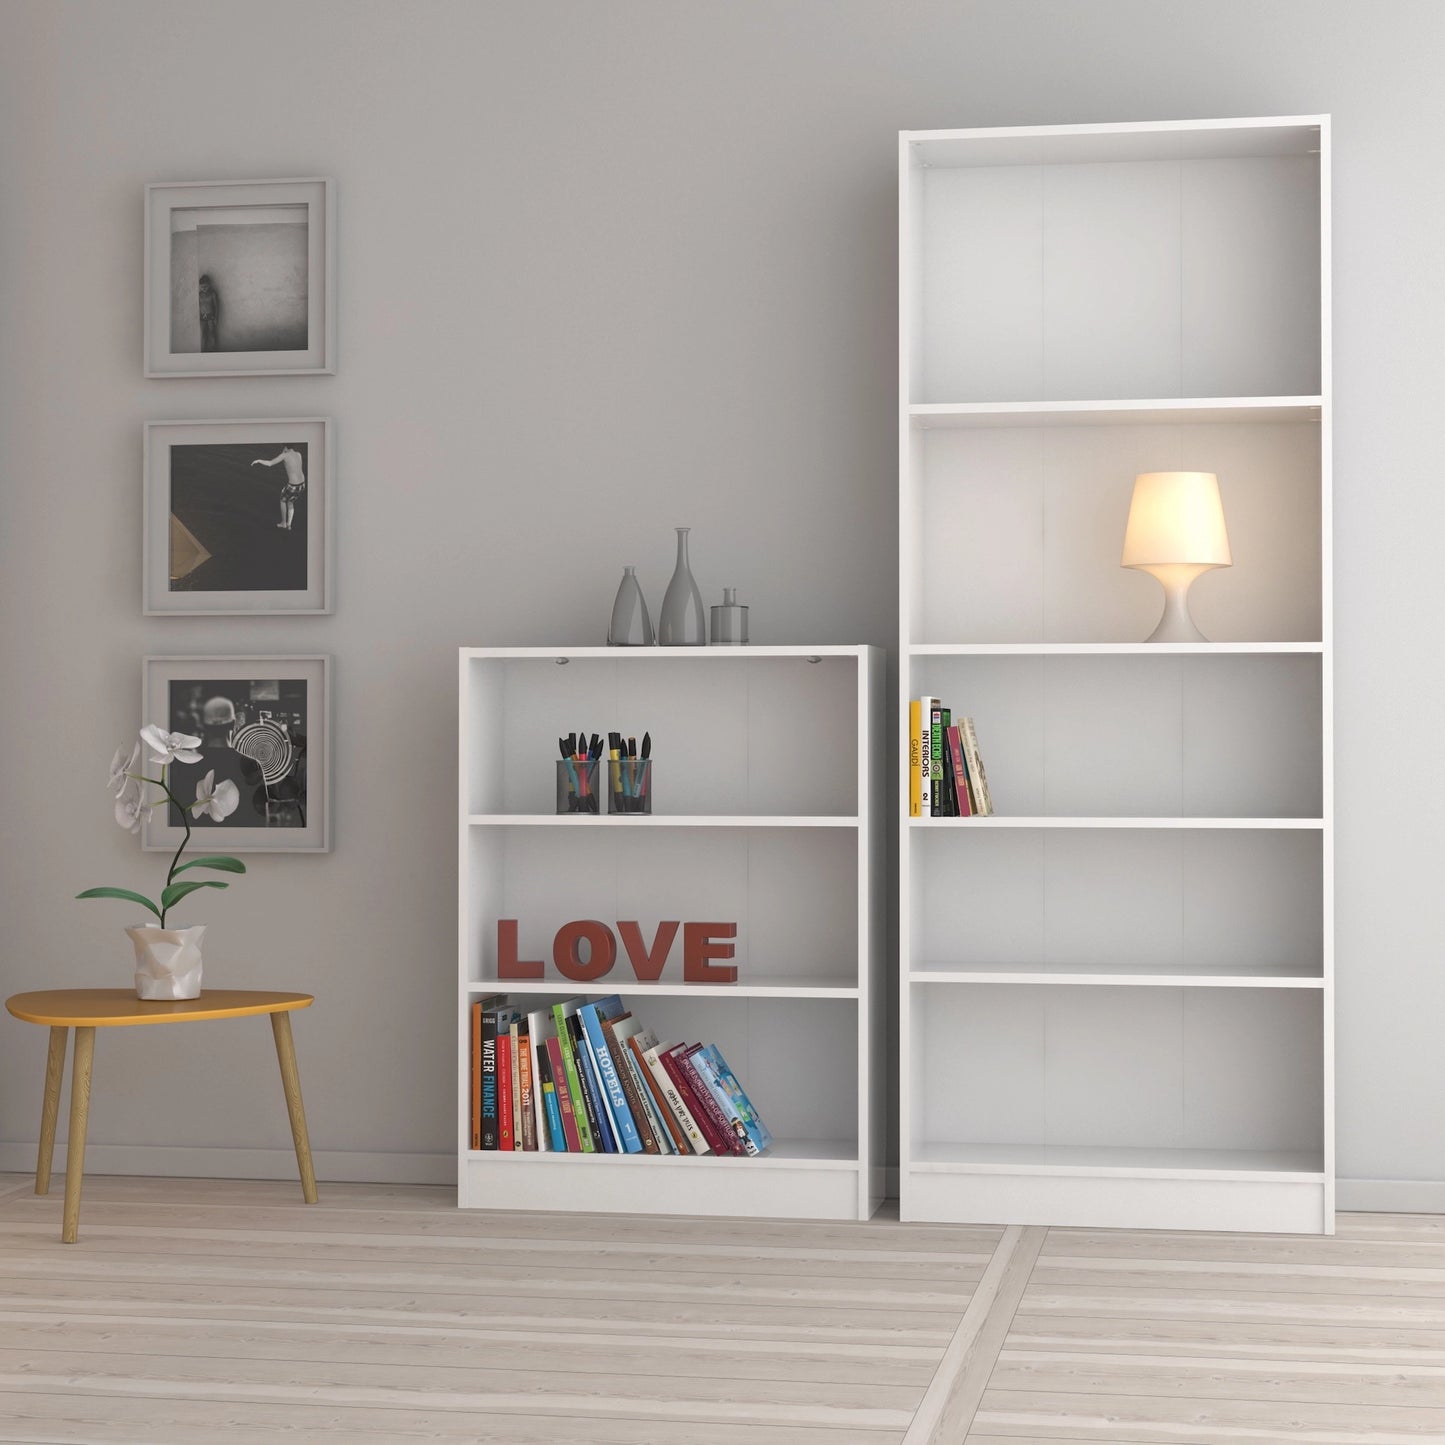 Furniture To Go Basic Low Wide Bookcase (2 Shelves) in White